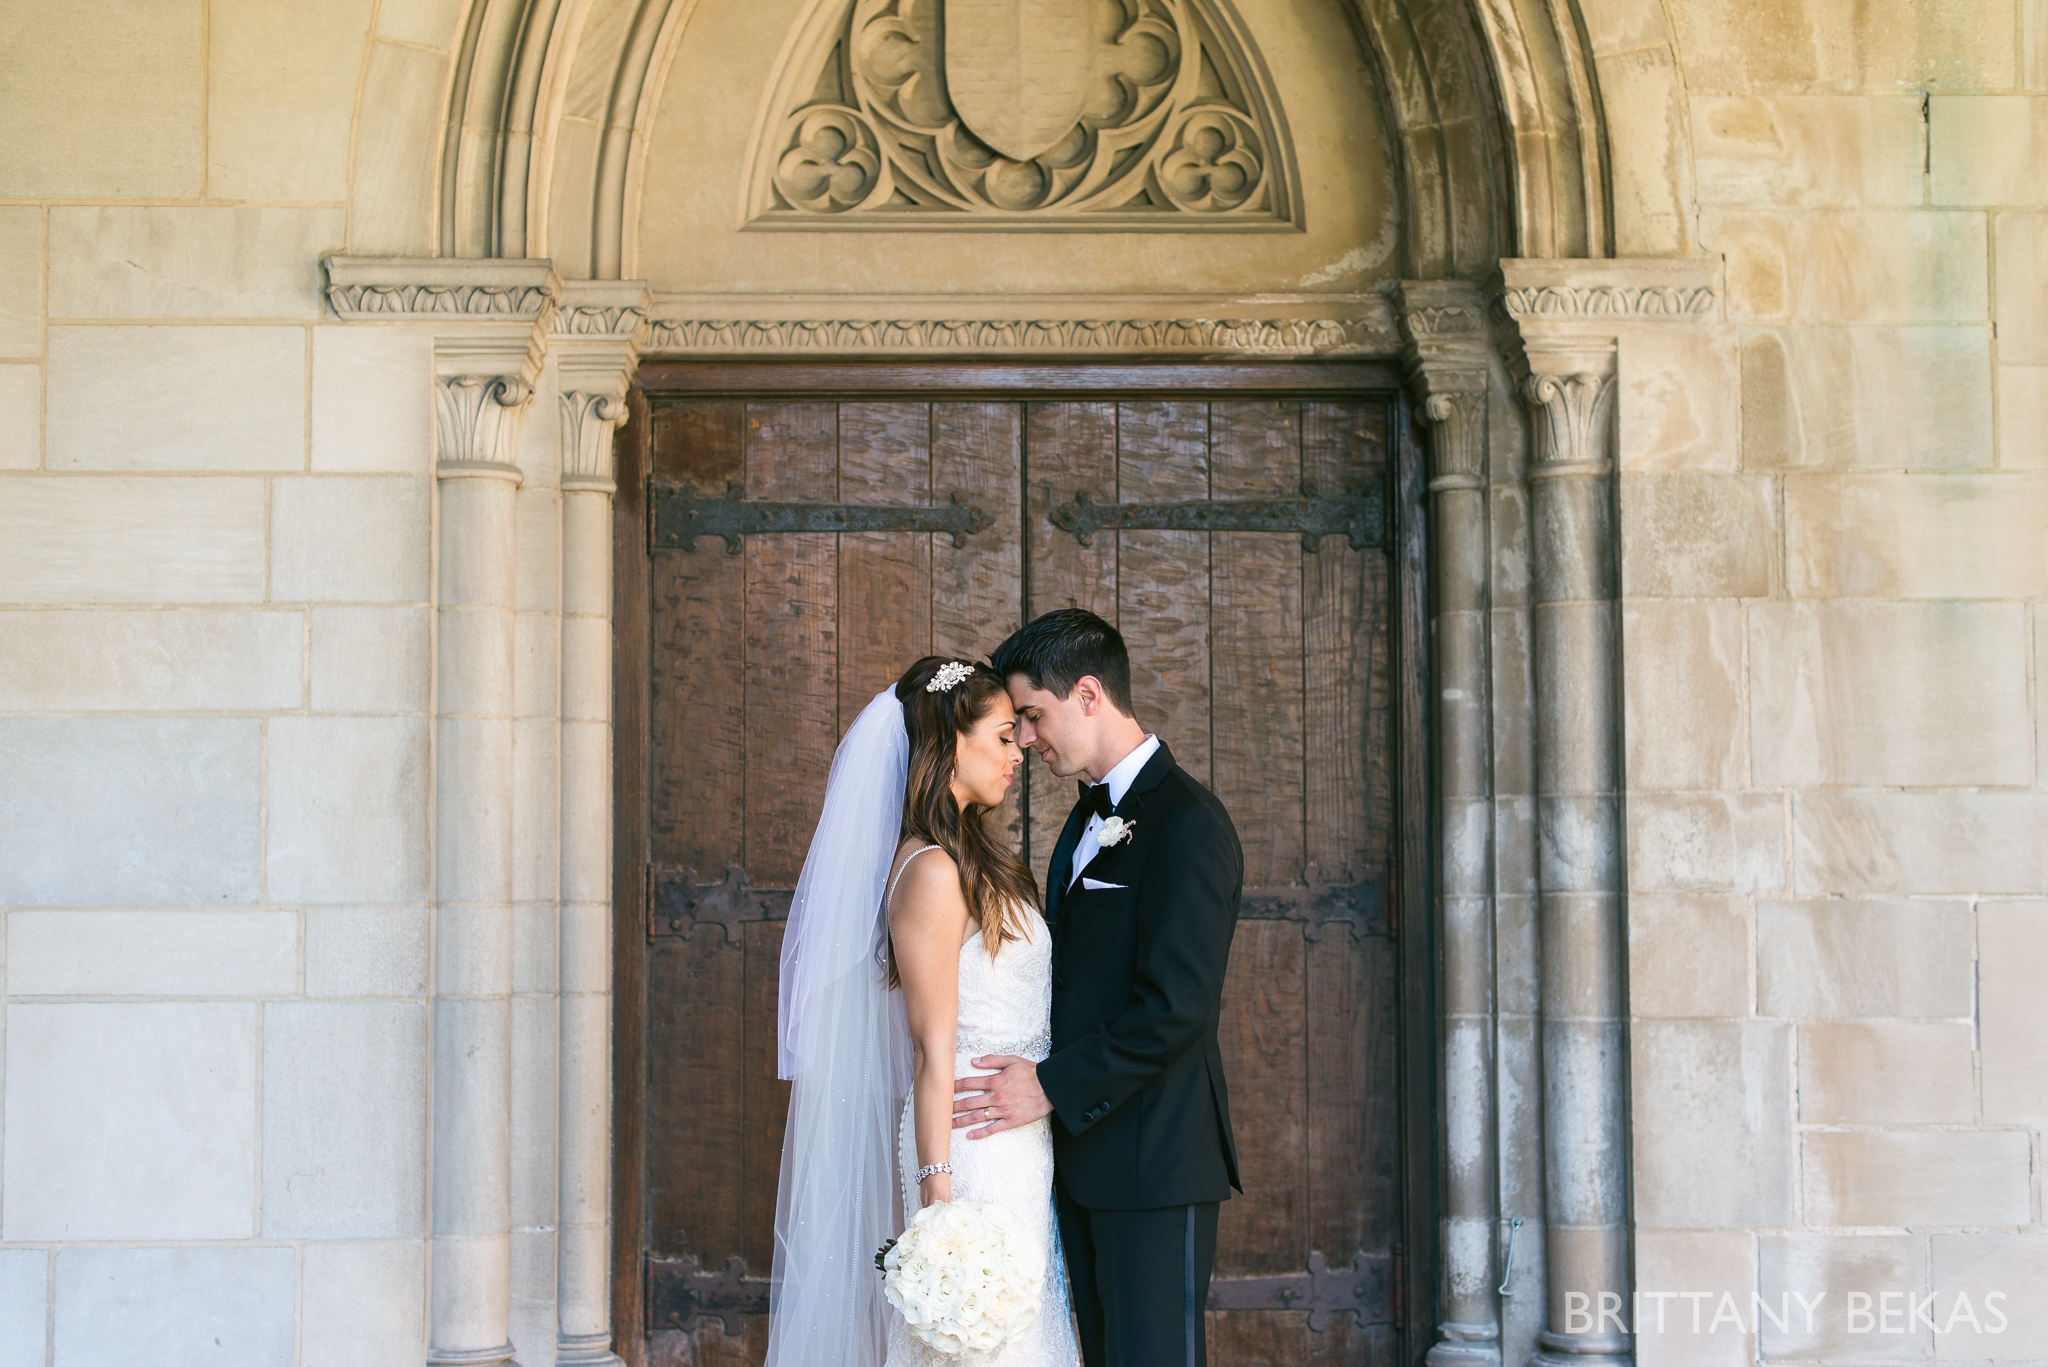 Chicago Wedding Photos St Edmunds + Concorde Banquets- Brittany Bekas Photography_0027